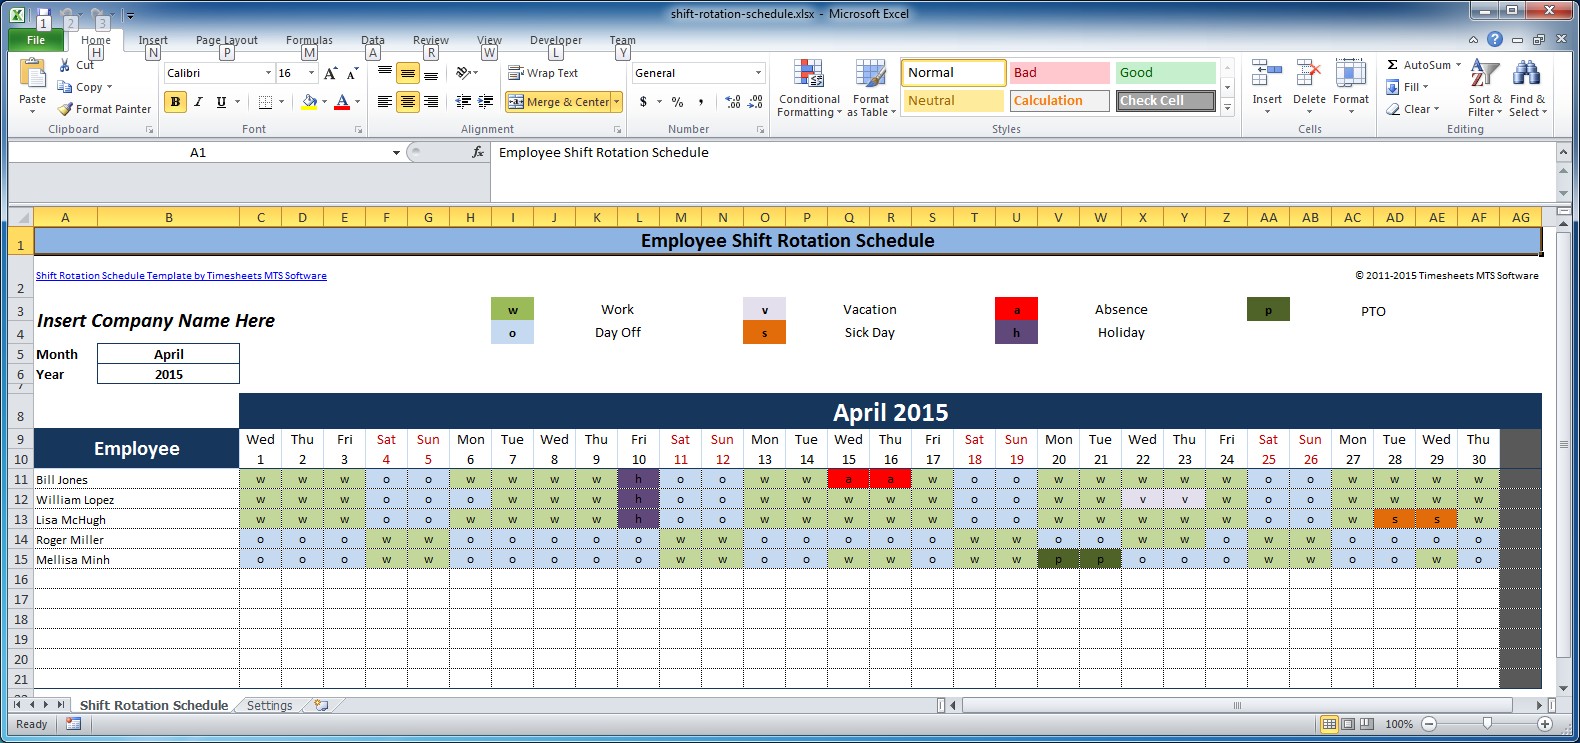 Weekly Employee Shift Schedule Template Excel planner template free